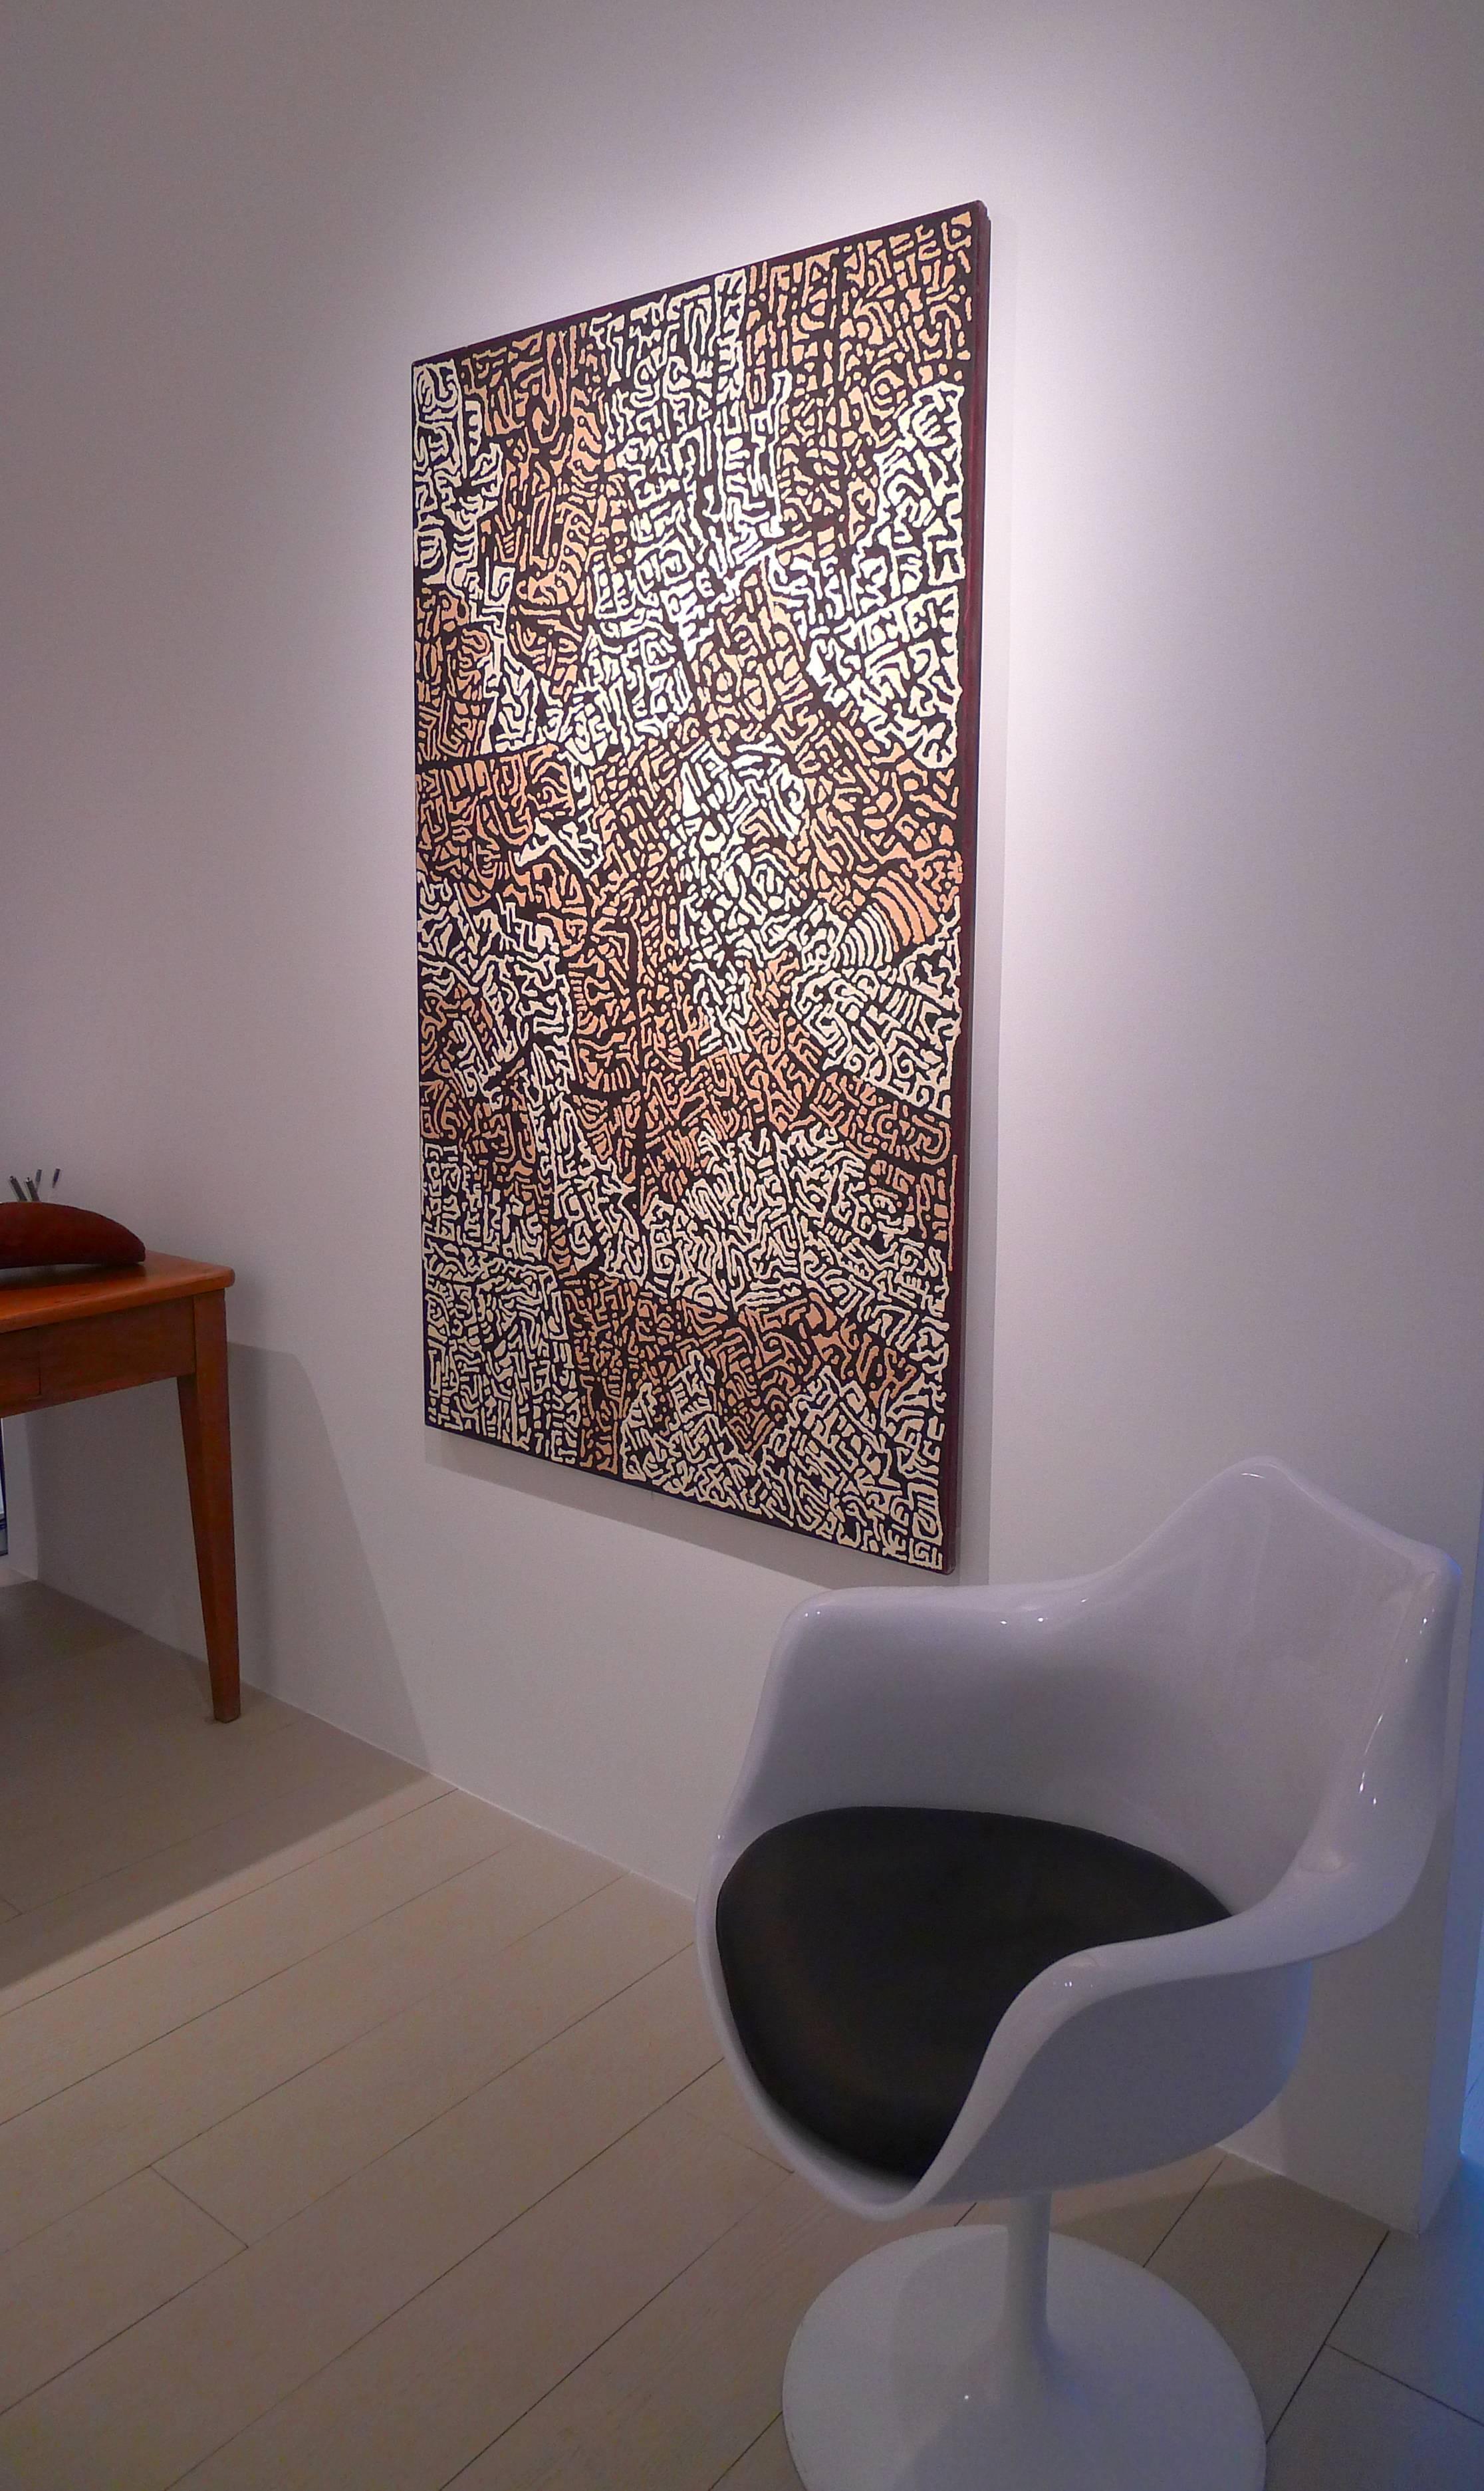 This work has a very controlled palette and excellent pattern making, utilising strong earthy ochres and confident detail given with the brush.
Information given on the artist:
Beyula is telling the story of the Kalinykalinypa or desert grevillea